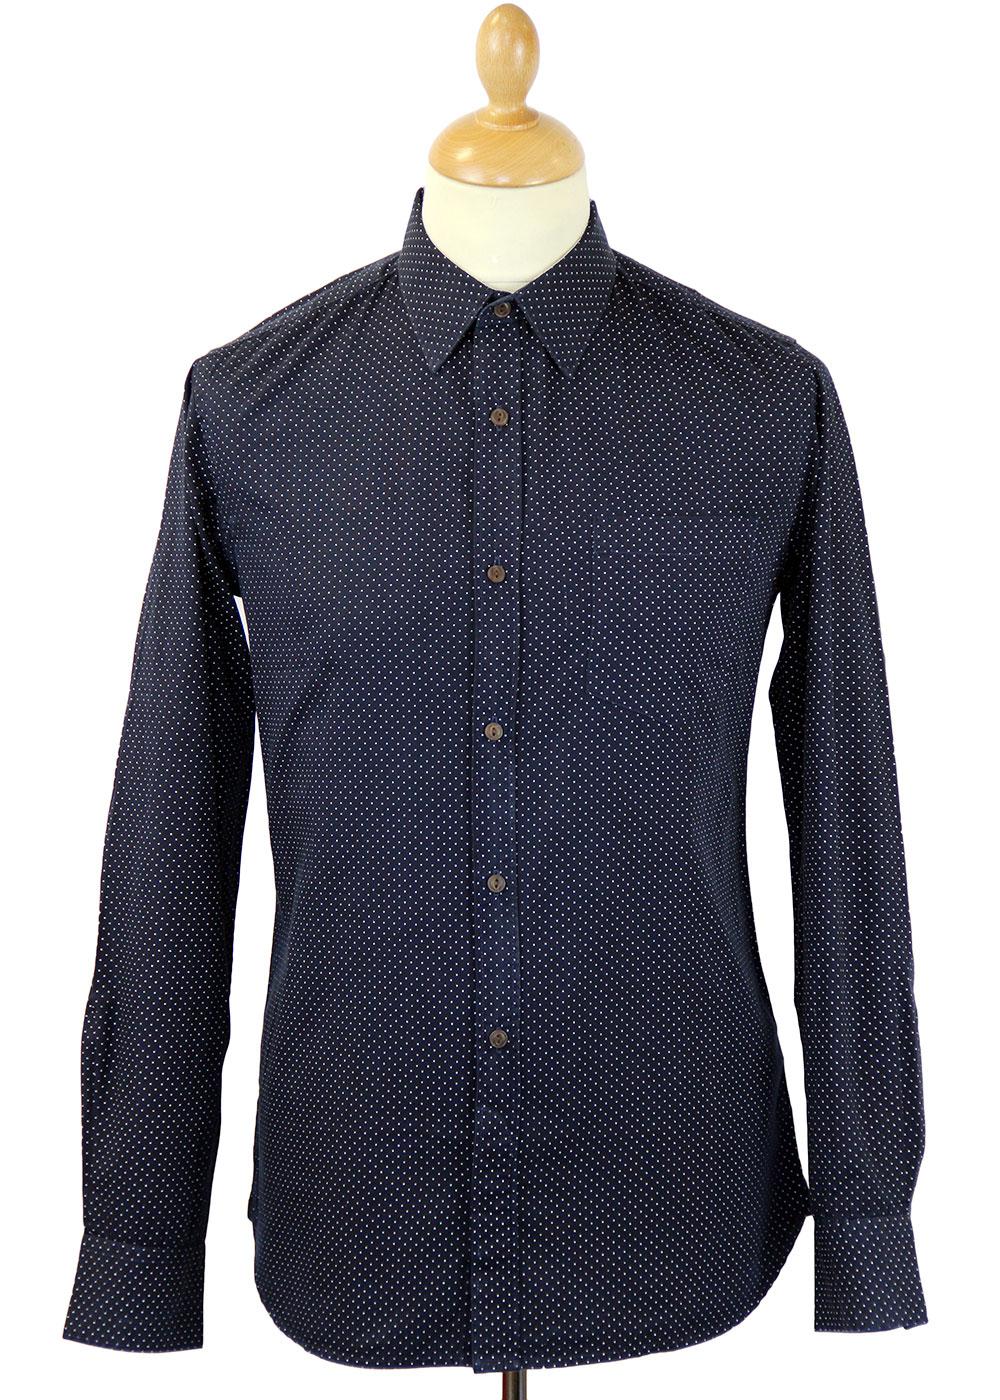 French Connection Charley Retro 60s Mod Polka Dot Shirt in Marine